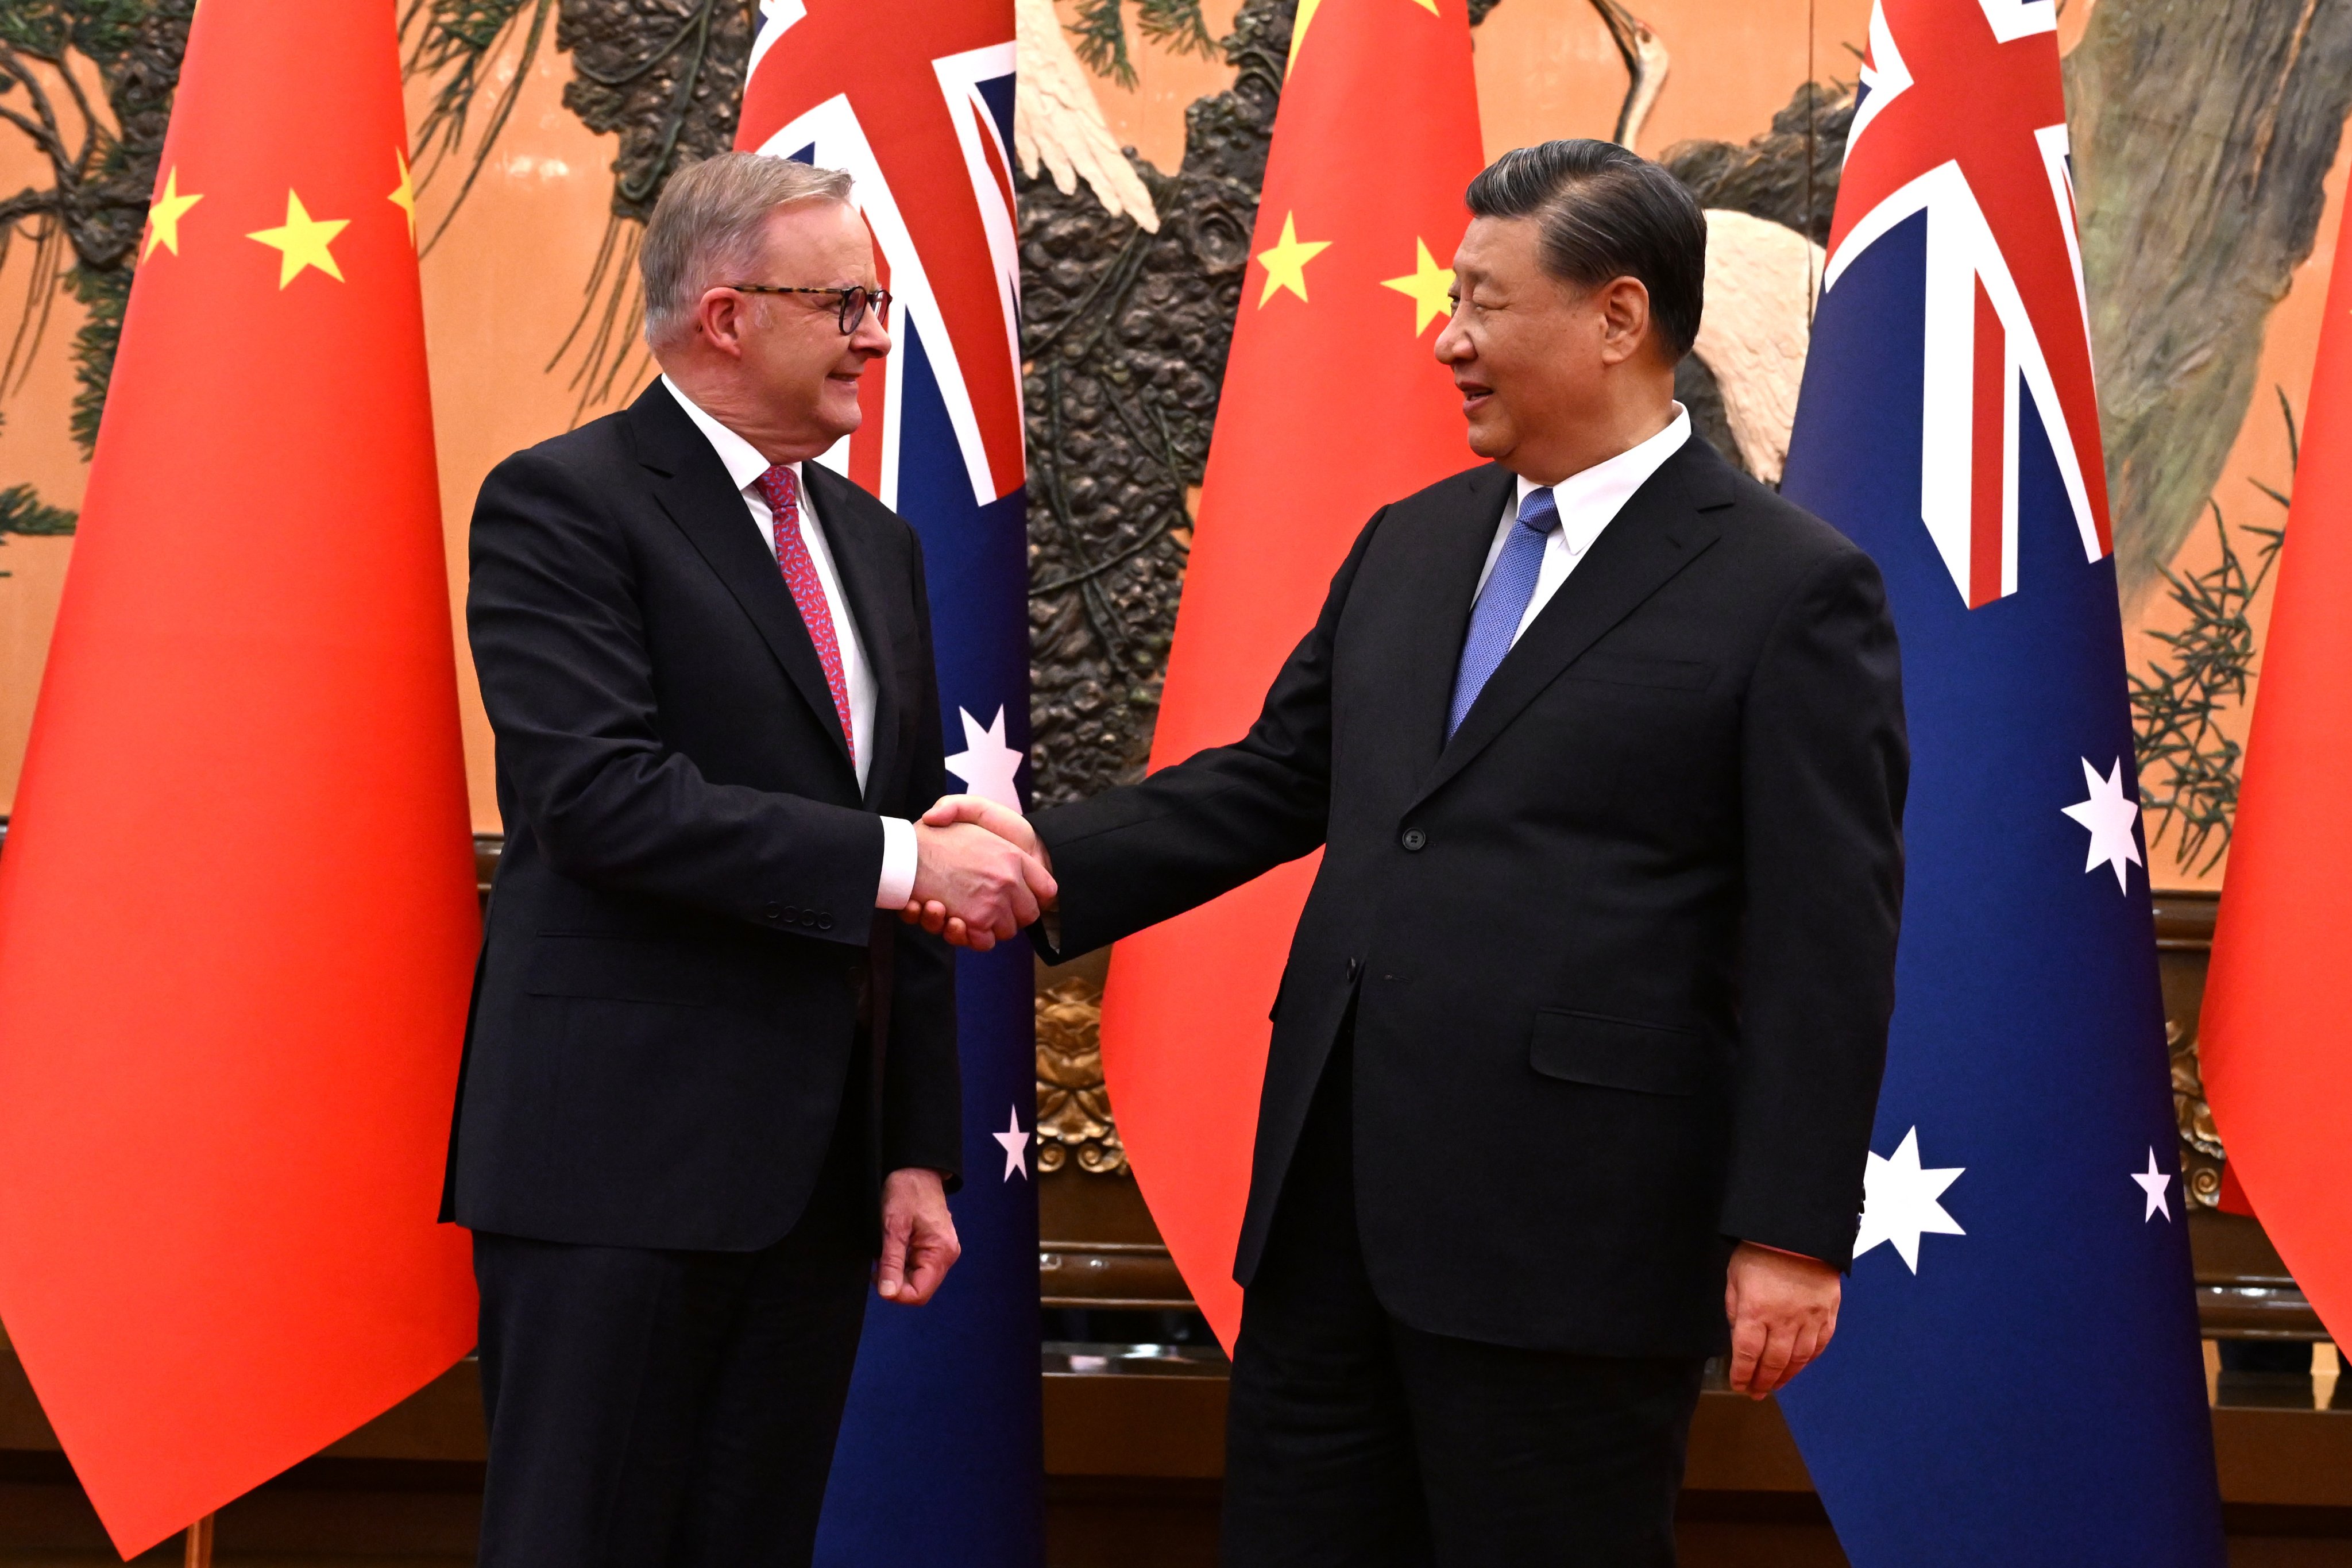 Australia’s Prime Minister Anthony Albanese meets with China’s President Xi Jinping in Beijing, on November 6. Photo: EPA-EFE